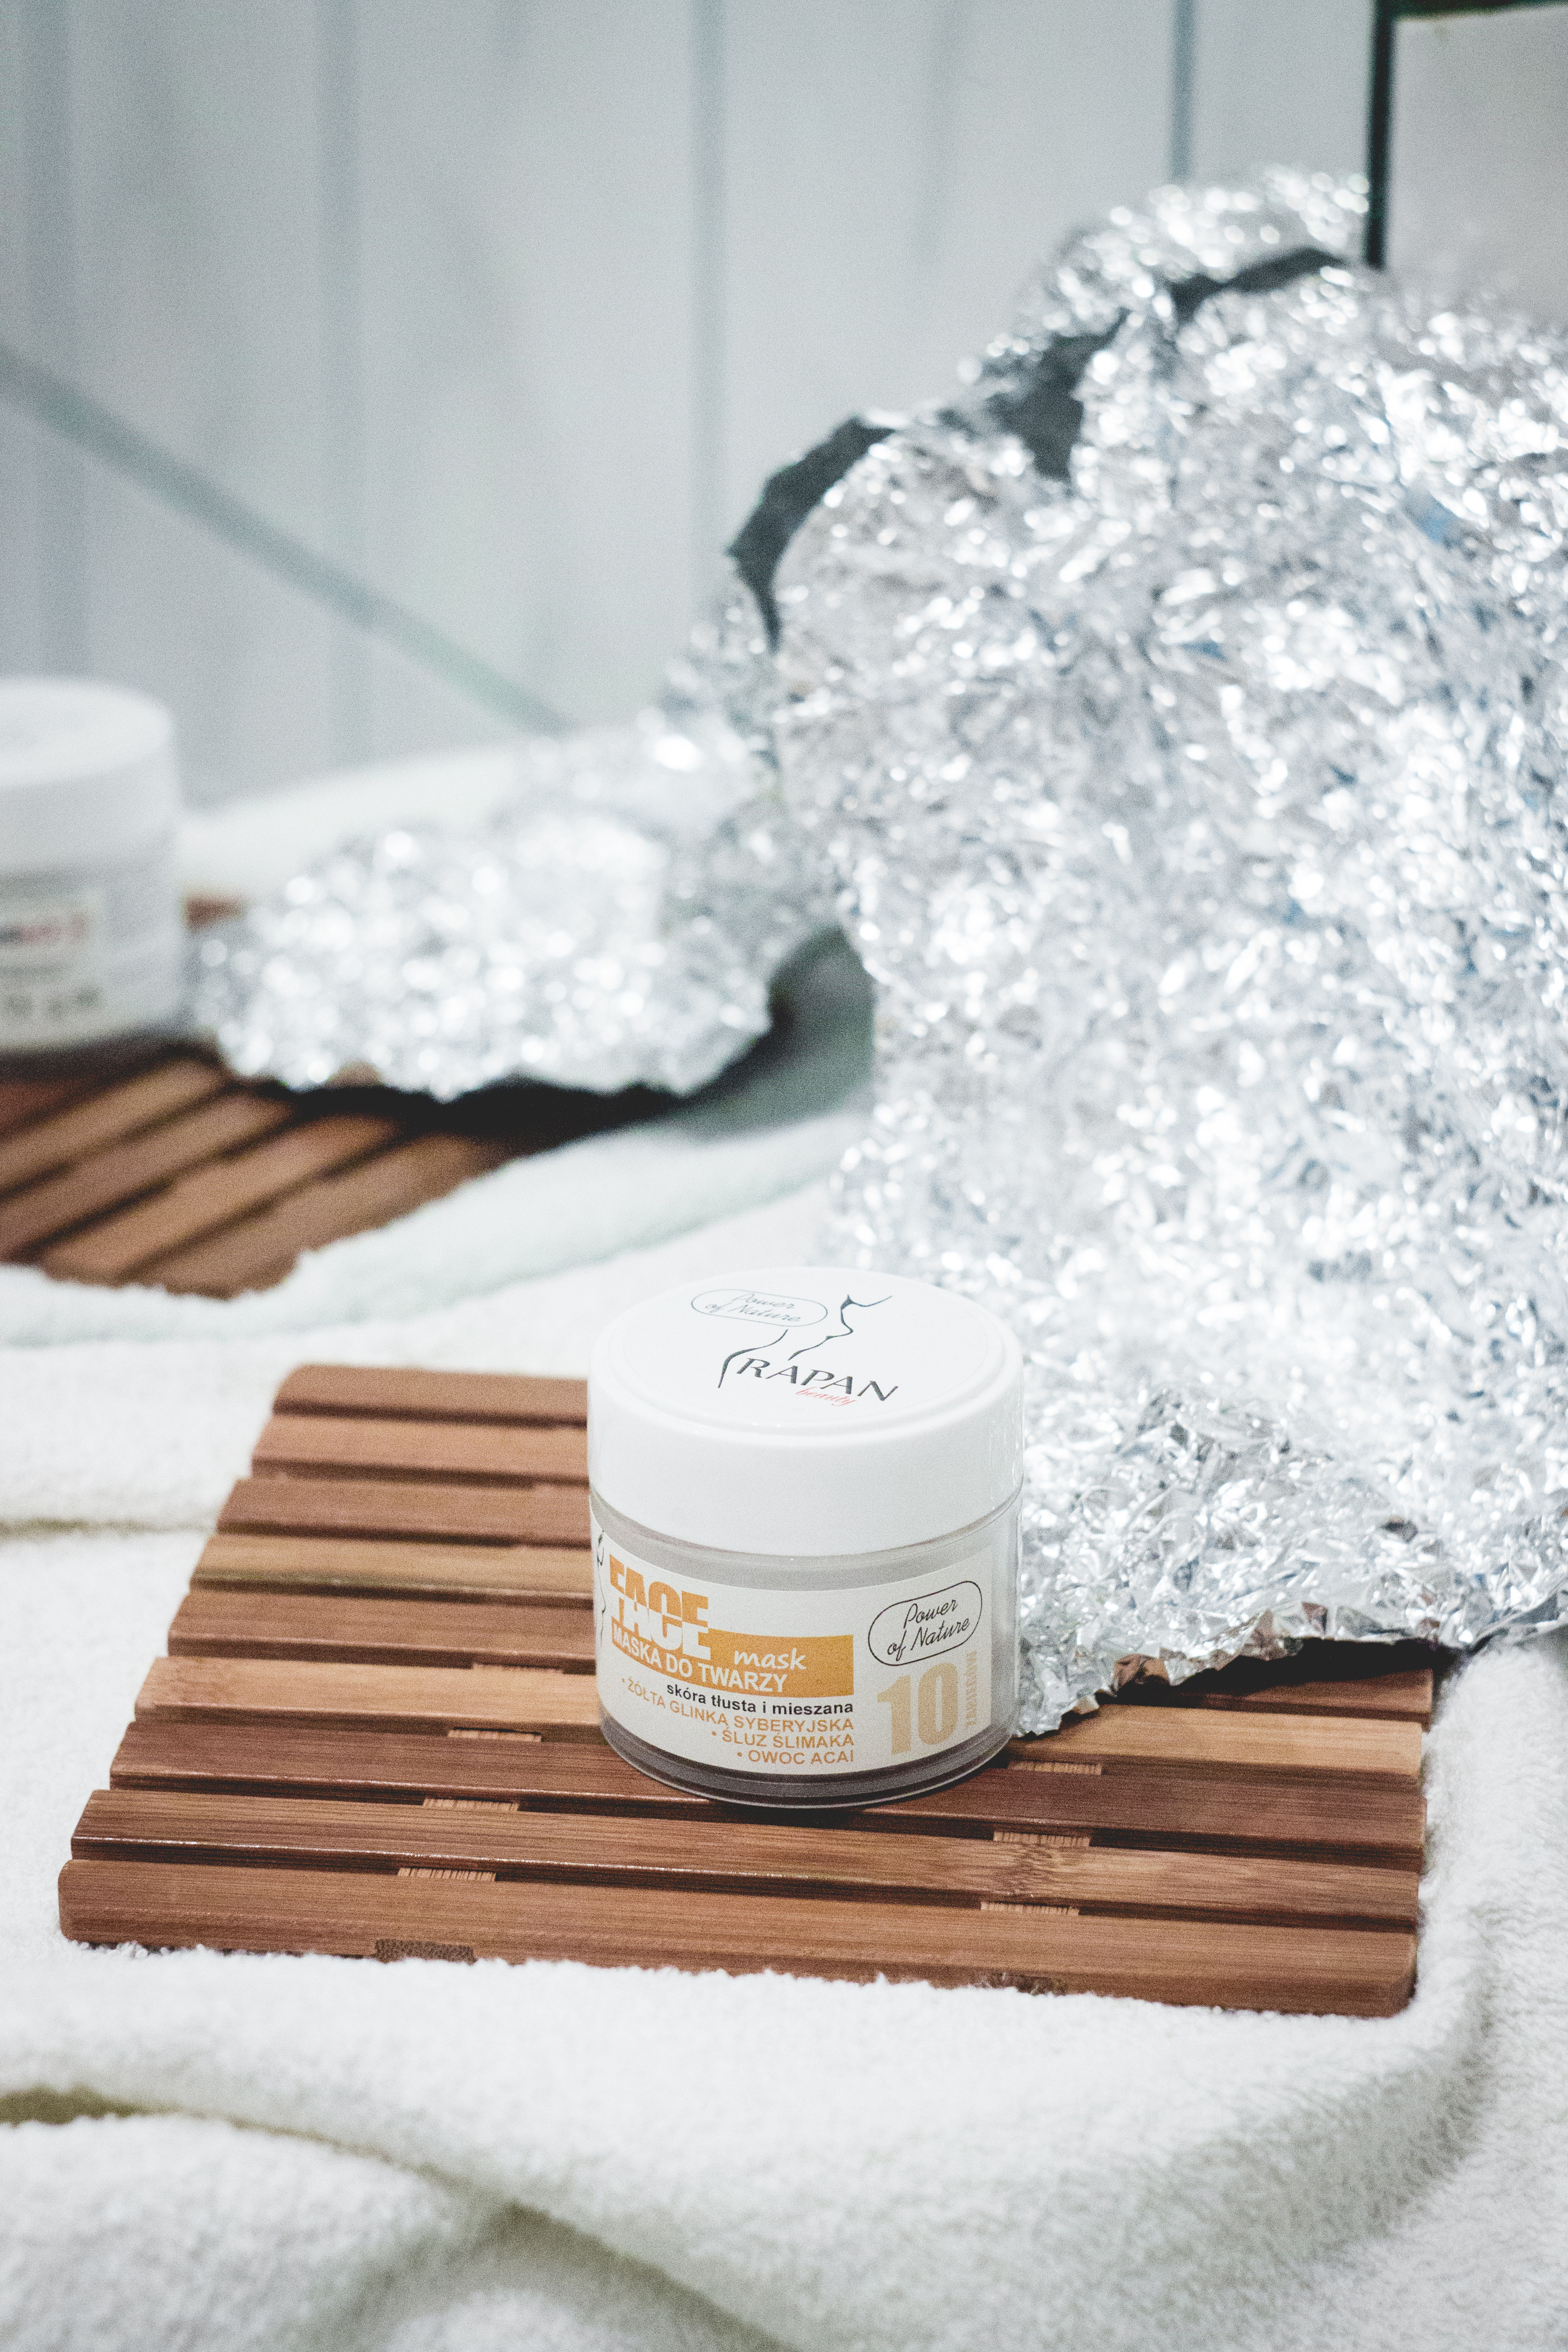 Rapan Beauty Power Of Nature Żółta Glinka + Śluz Ślimaka | Yellow Clay + Snail Filtrate | KHERBLOG | All about korean & natural beauty with a dose of lifestyle